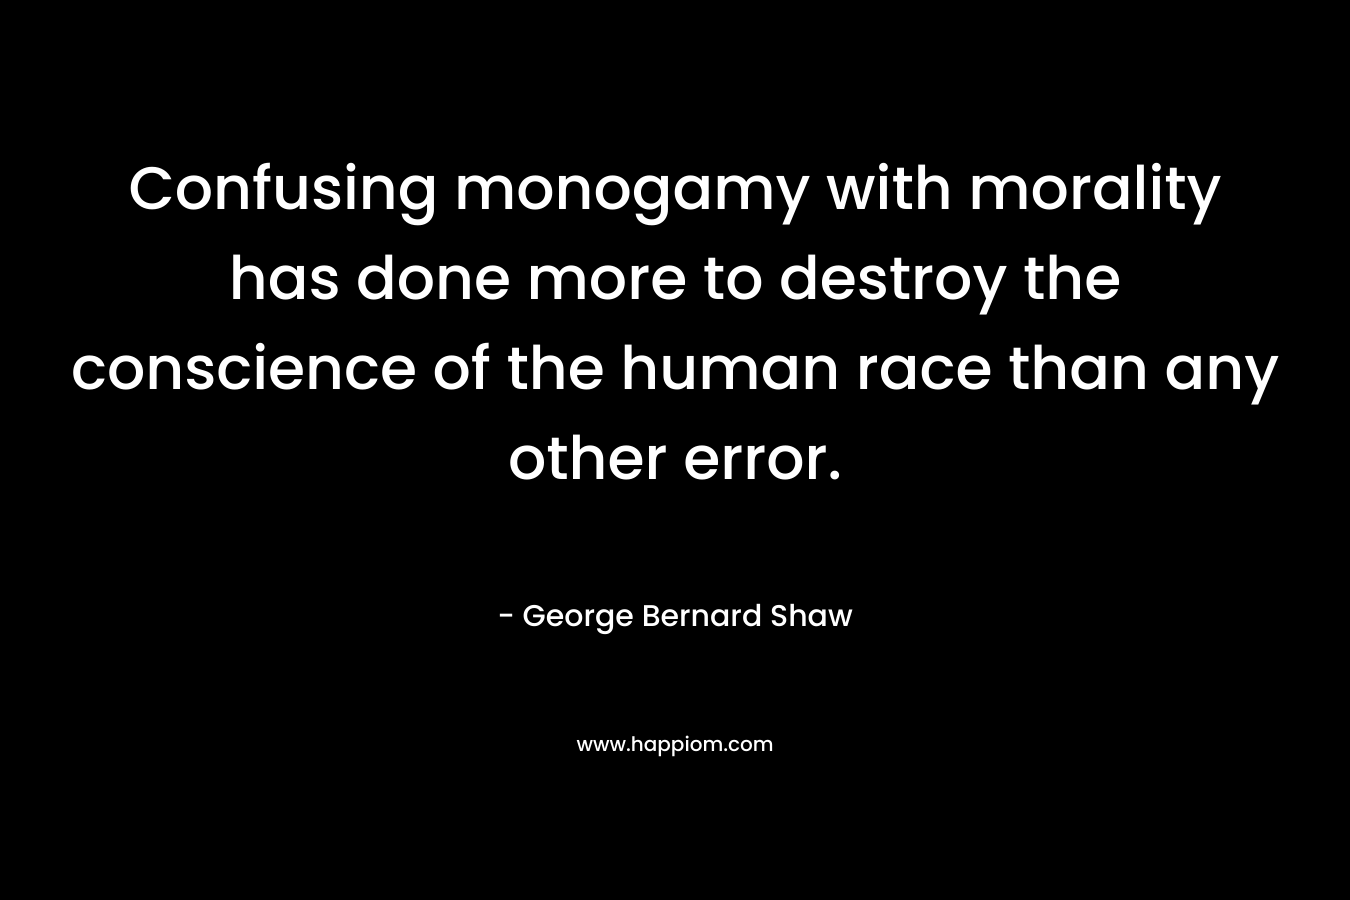 Confusing monogamy with morality has done more to destroy the conscience of the human race than any other error.